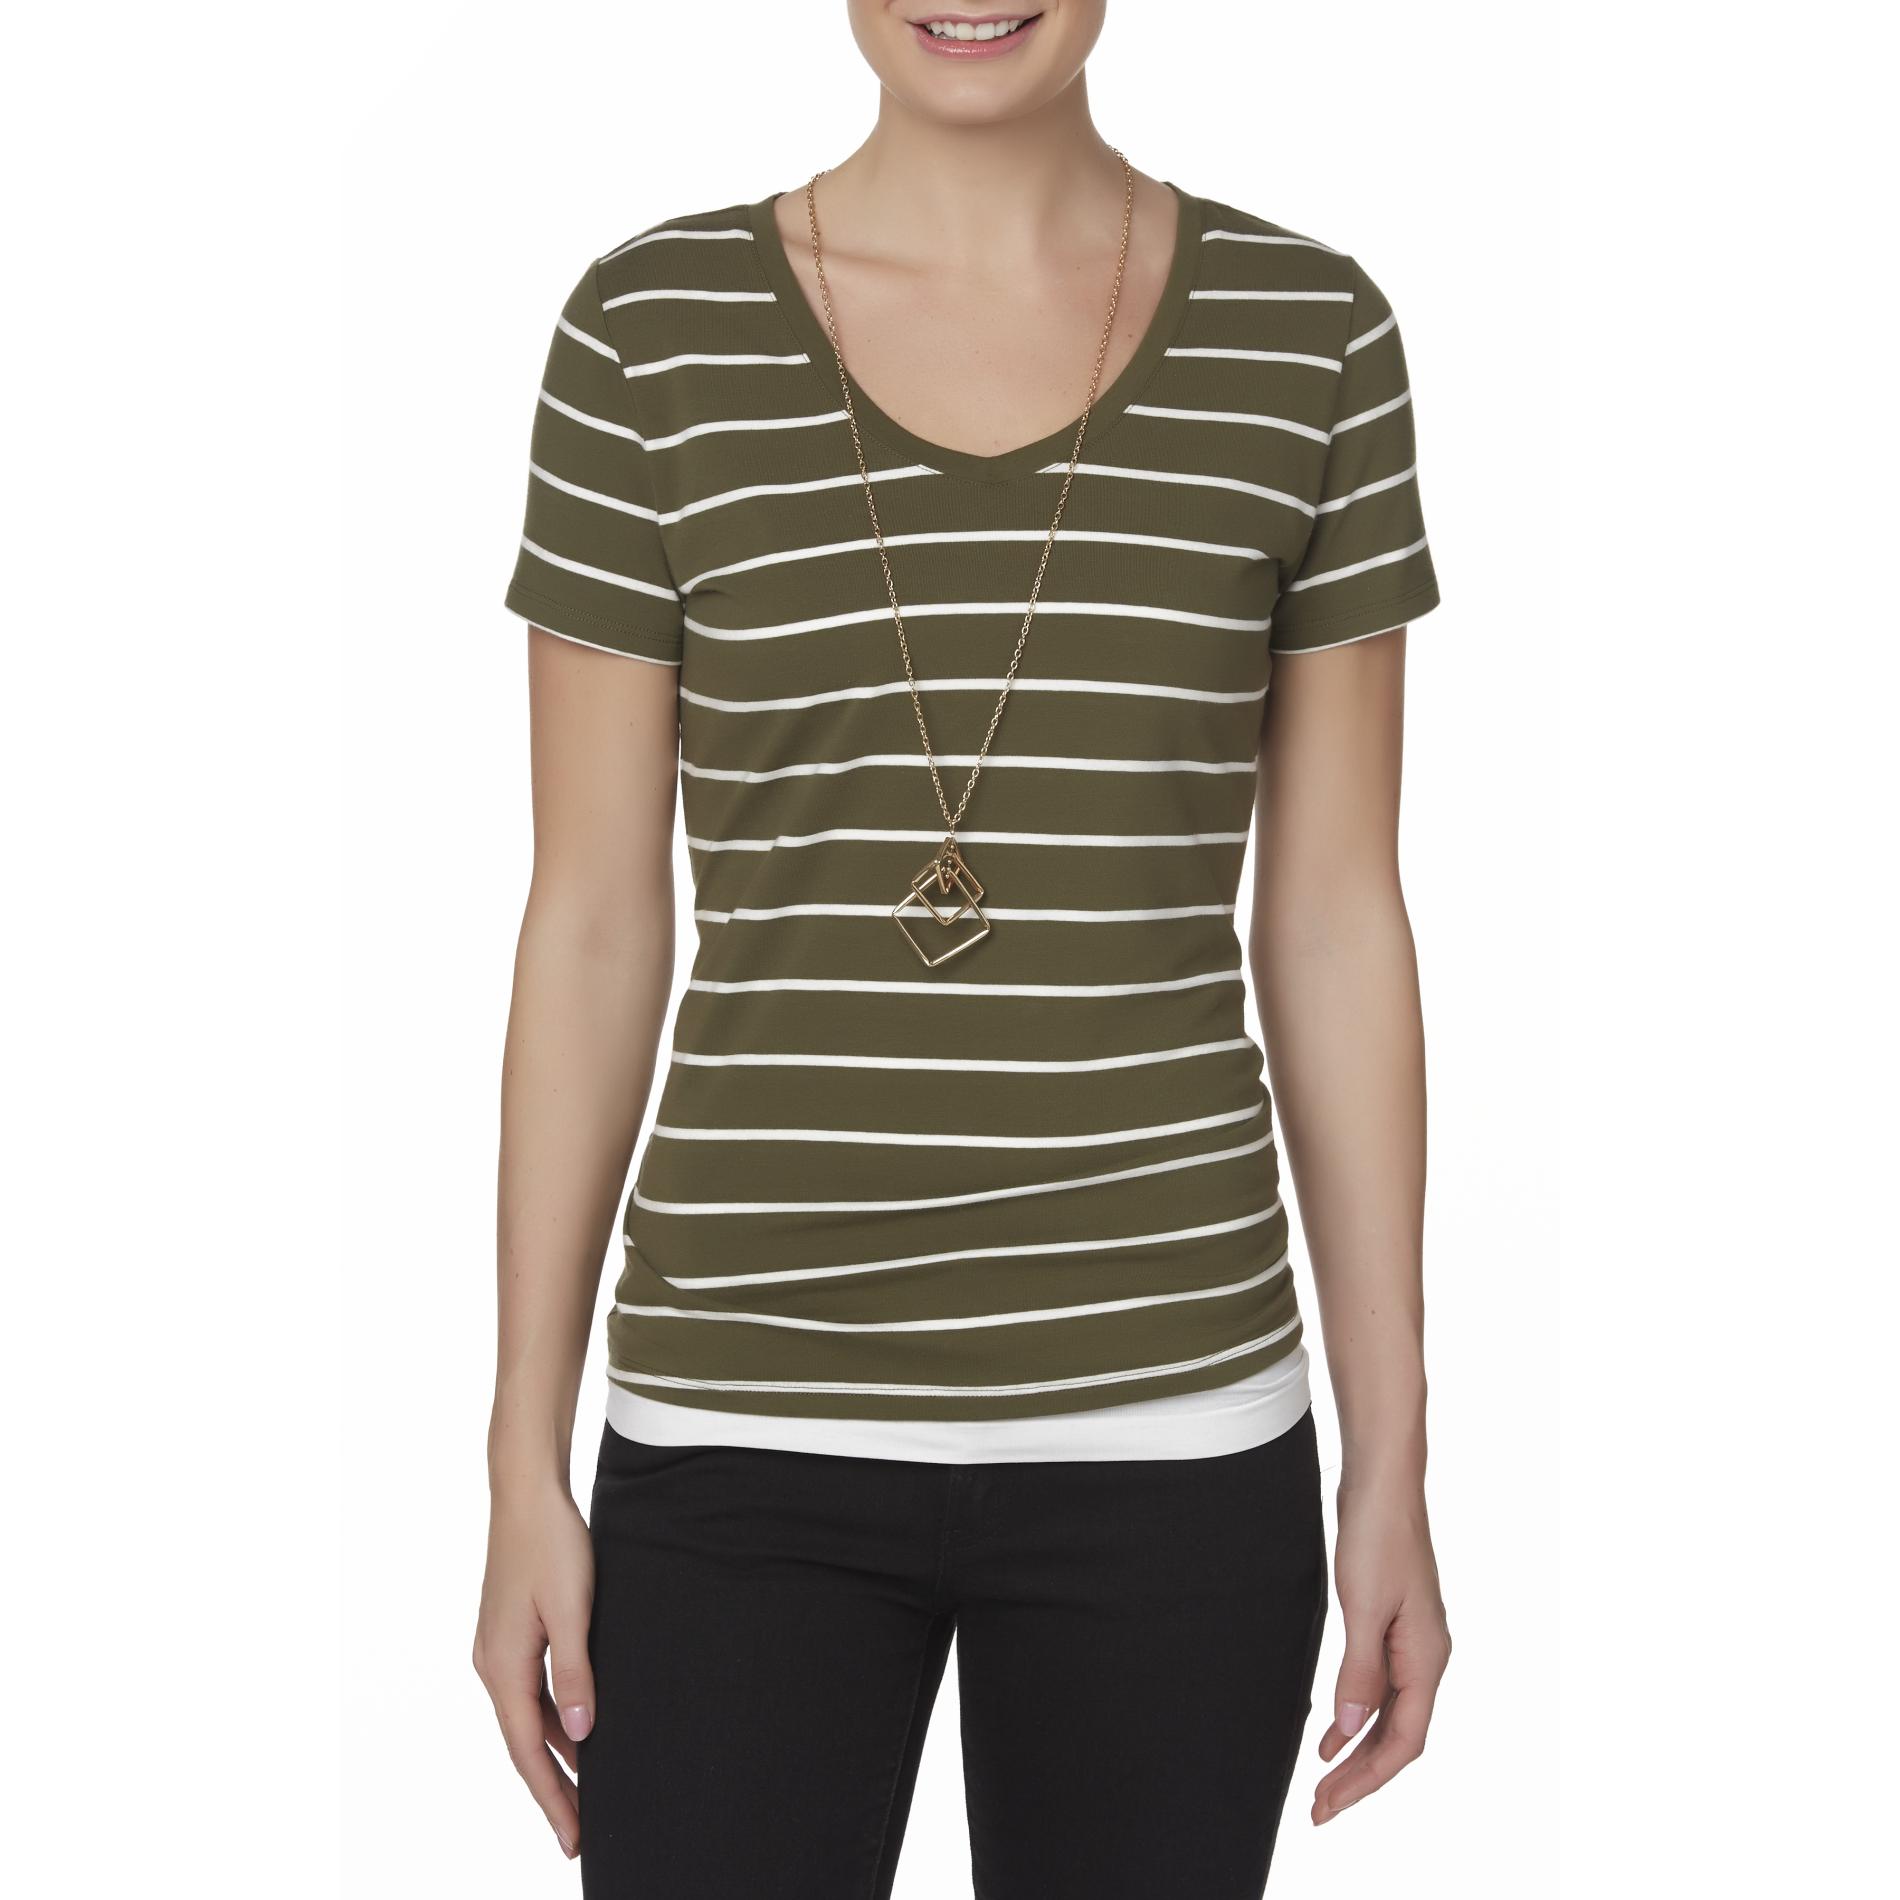 Simply Styled Women's Cap Sleeve T-Shirt - Striped